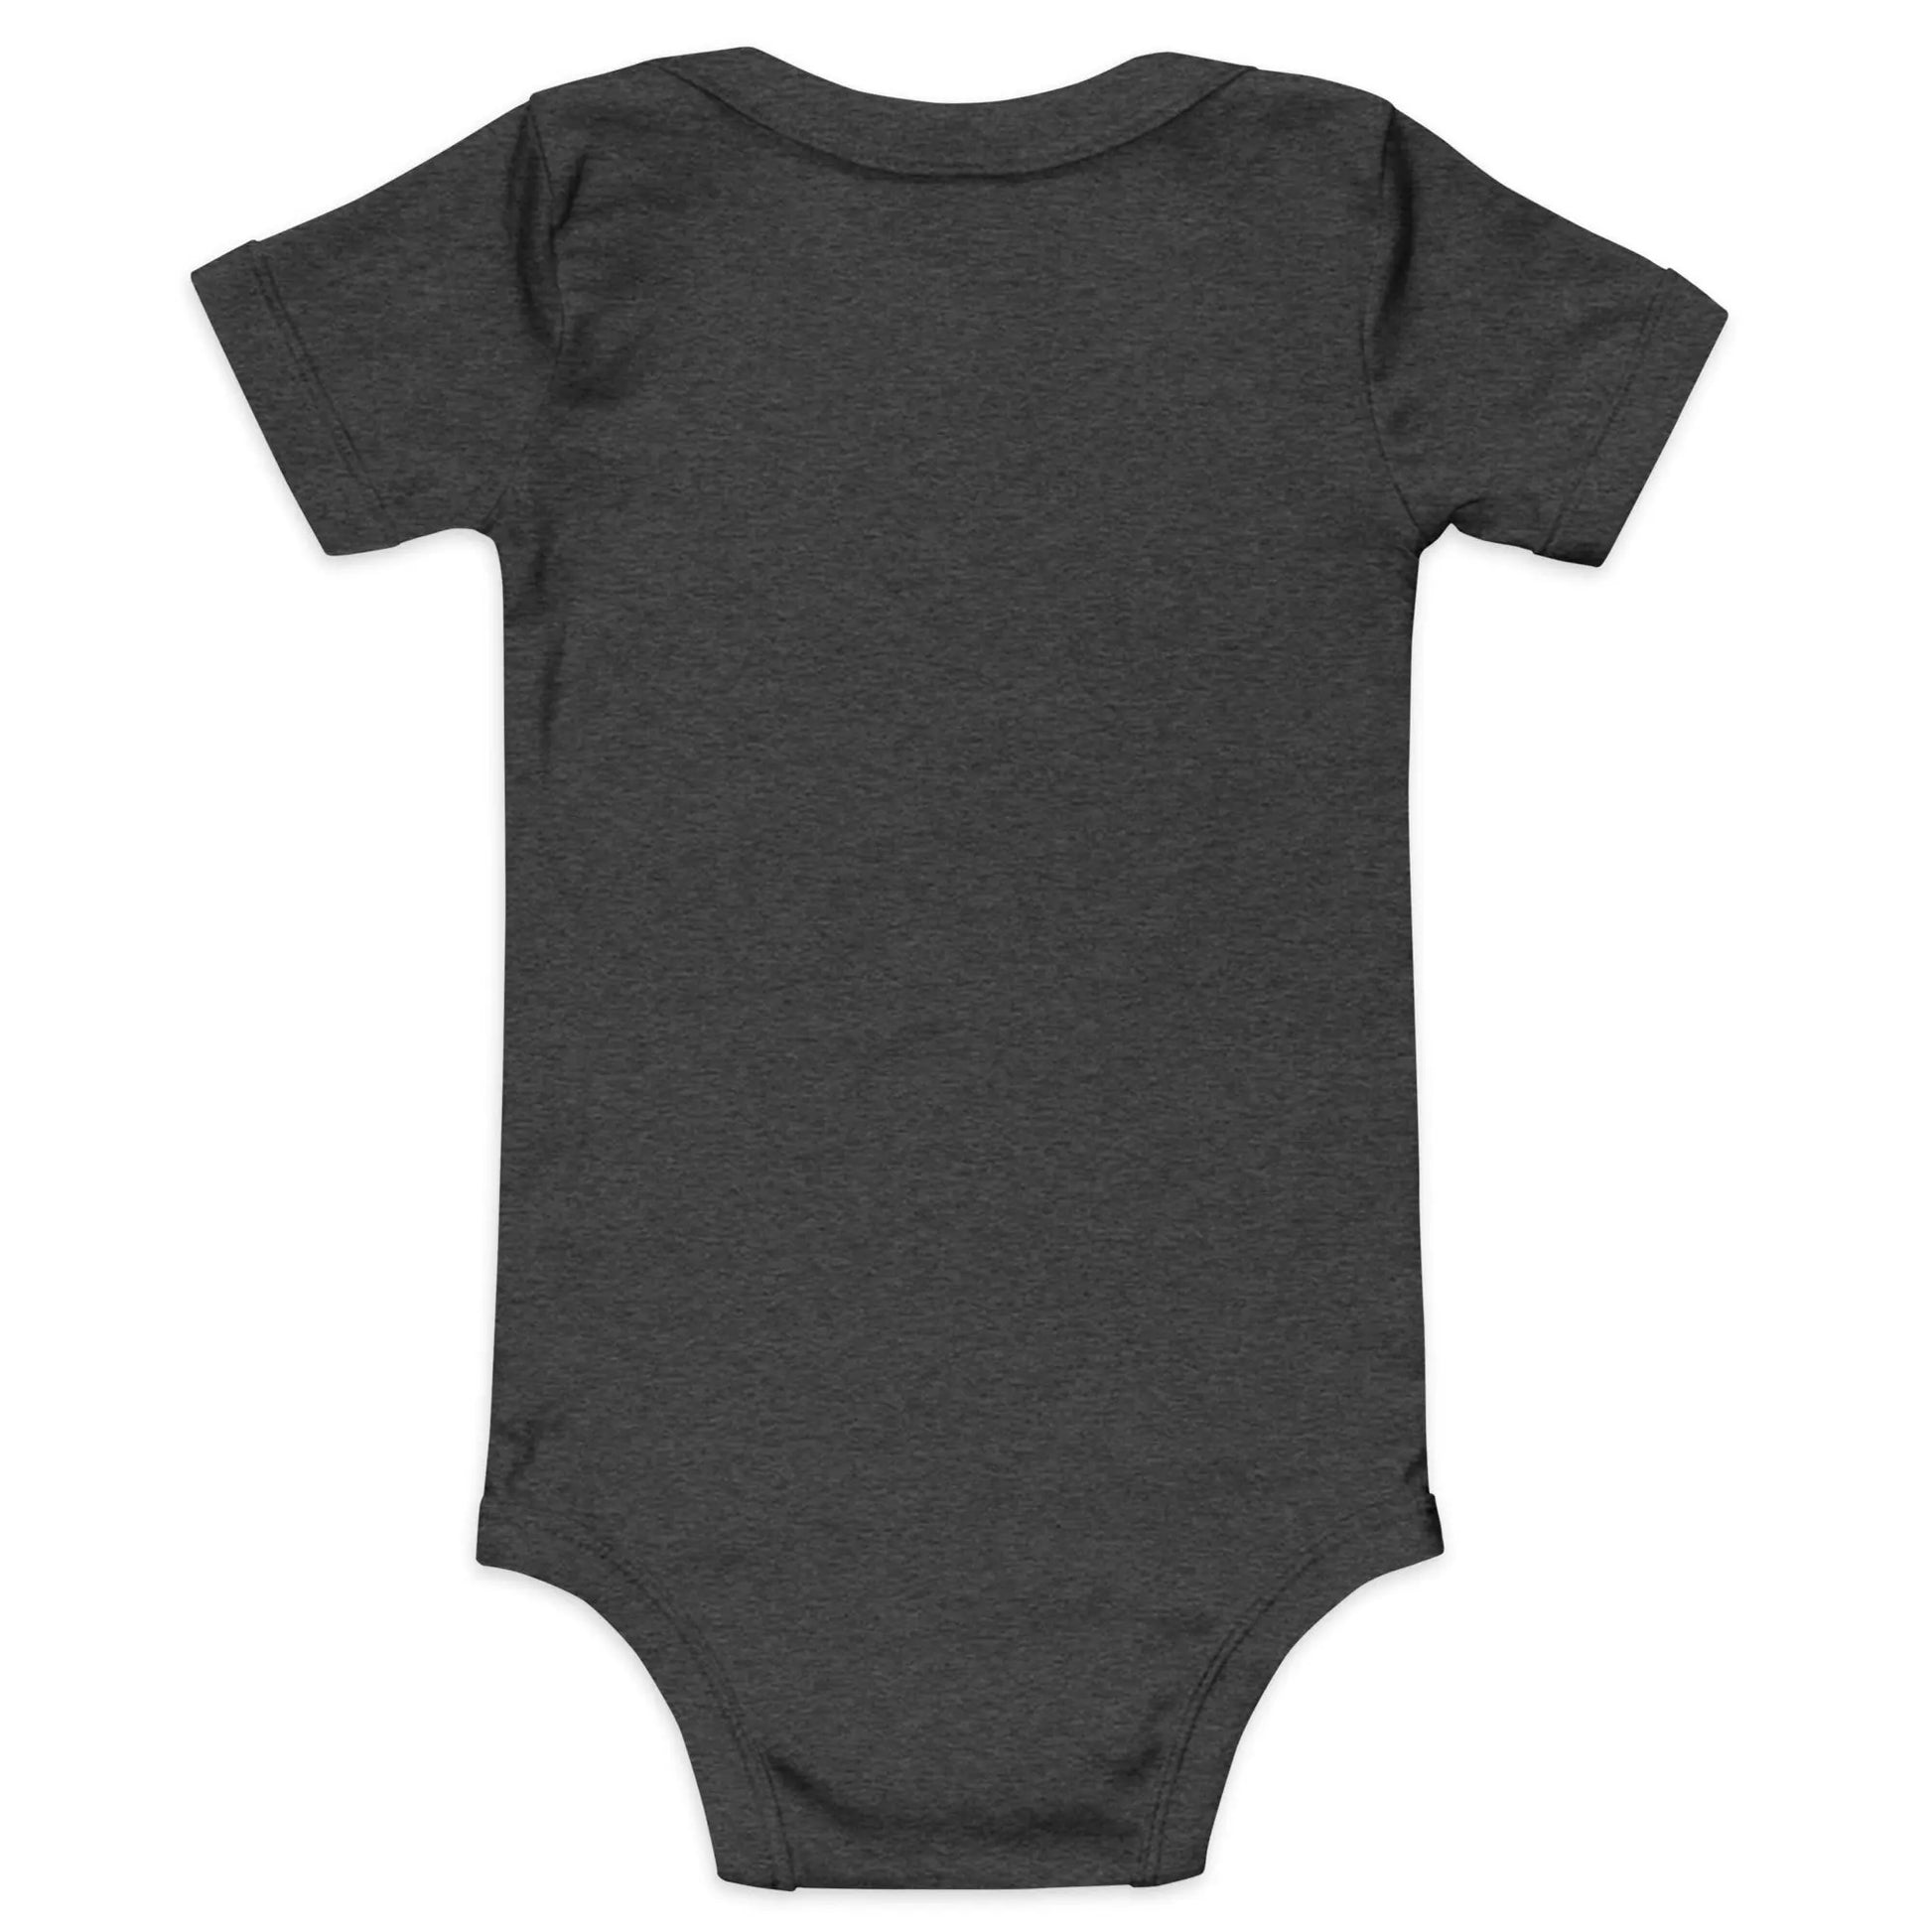 Vintage Dog Lovers - Bitcoin Baby Body Suit - One Piece with Short Sleeve Grey Heather 